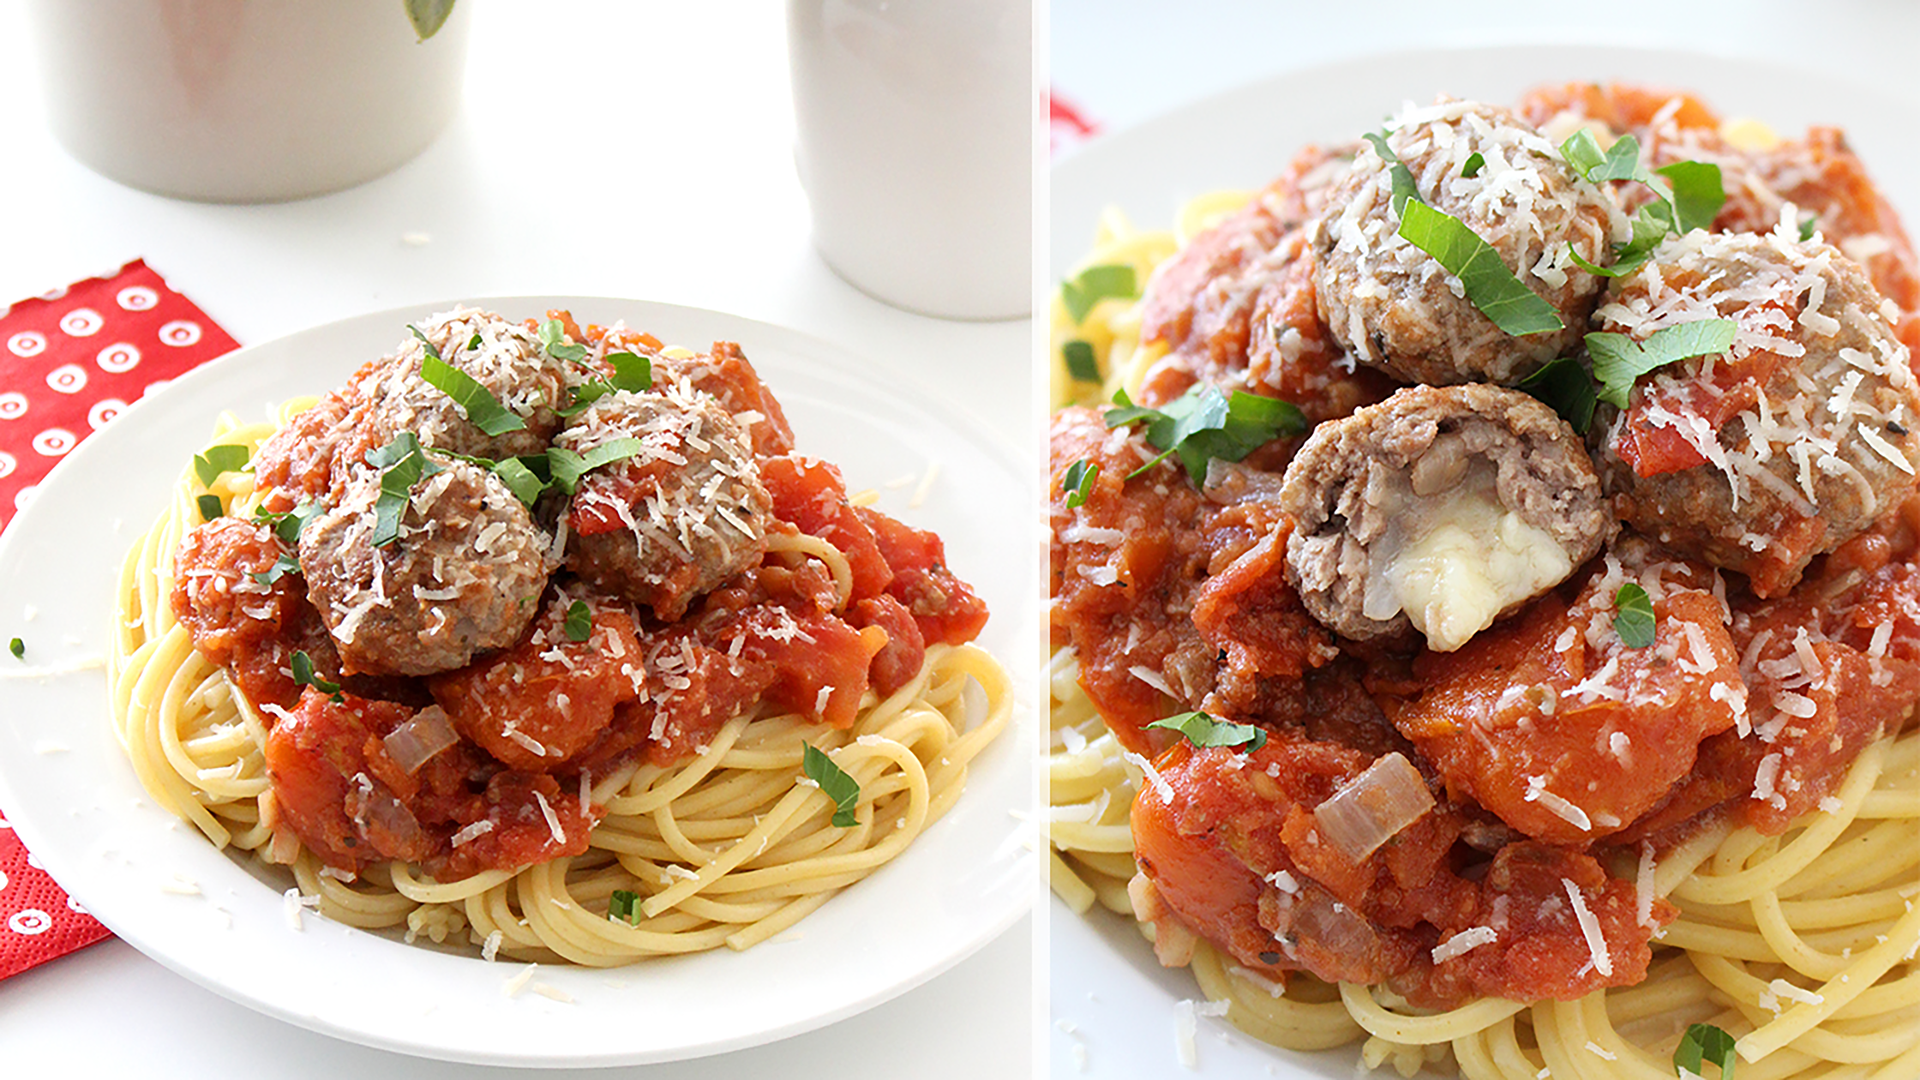 Spaghetti And Meatballs Png Hd Hdpng.com 1920 - Spaghetti And Meatballs, Transparent background PNG HD thumbnail